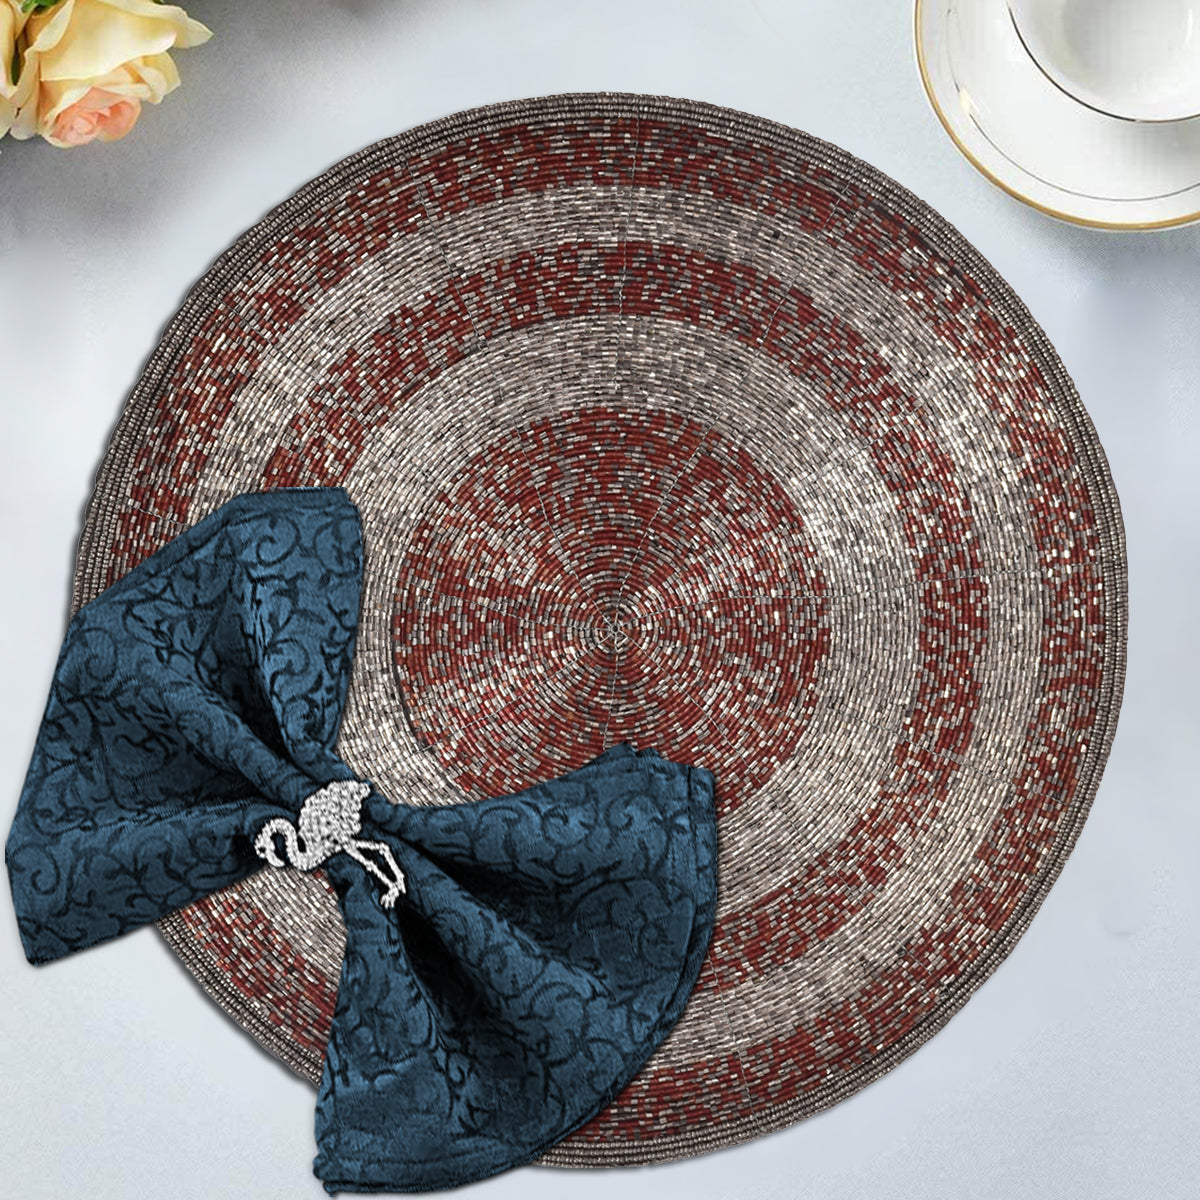 The Melia Beaded Placemats